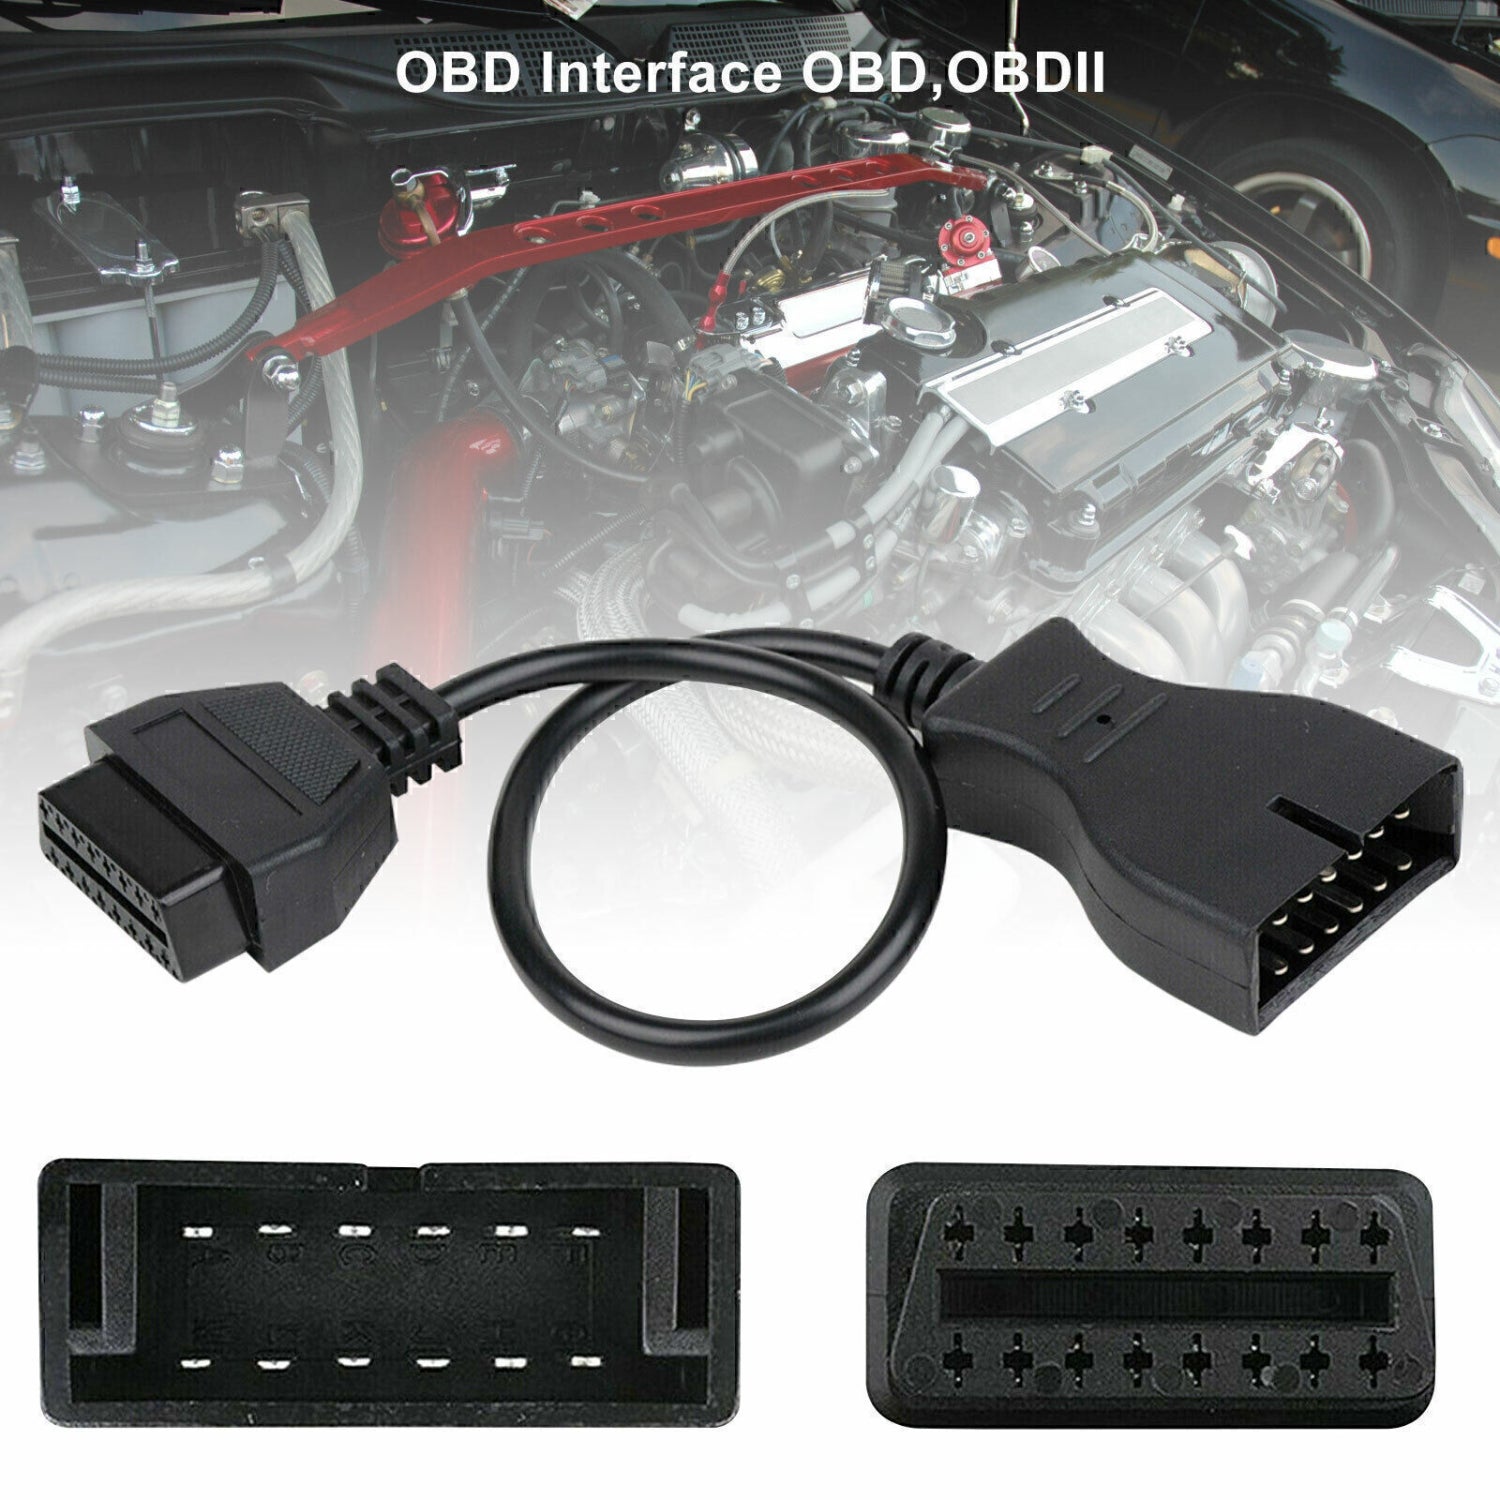 12 Pin OBD1 To 16 Pin OBD2 Convertor Adapter Cable For GM Diagnostic Scanner